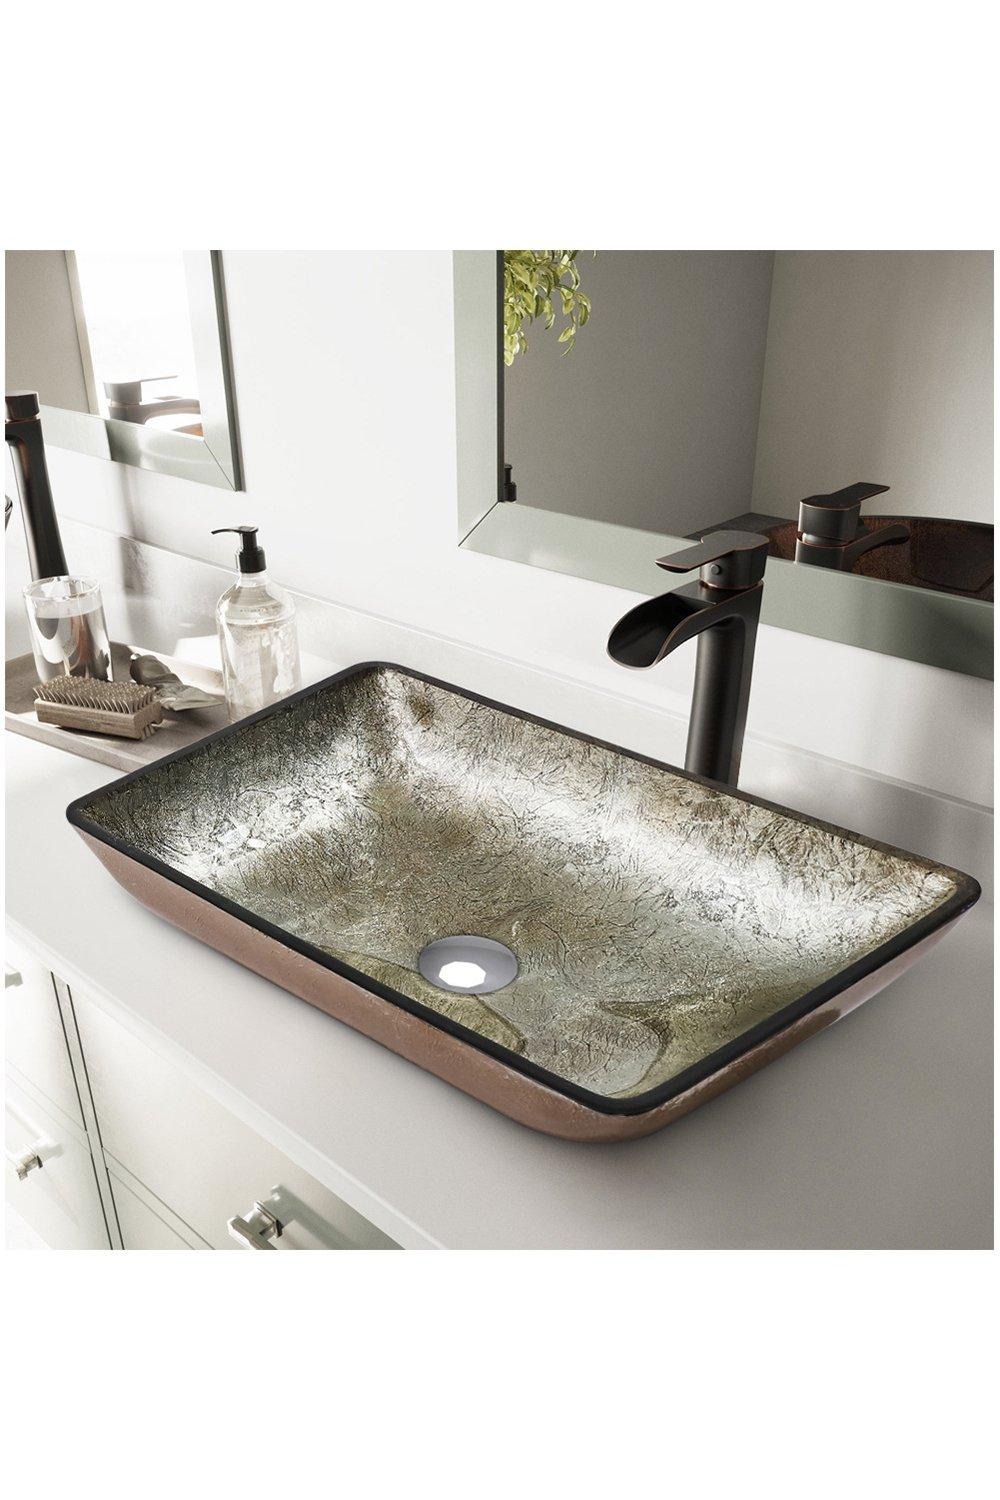 Gold Bathroom Artistic Vessel Sink Tempered Glass with Drain